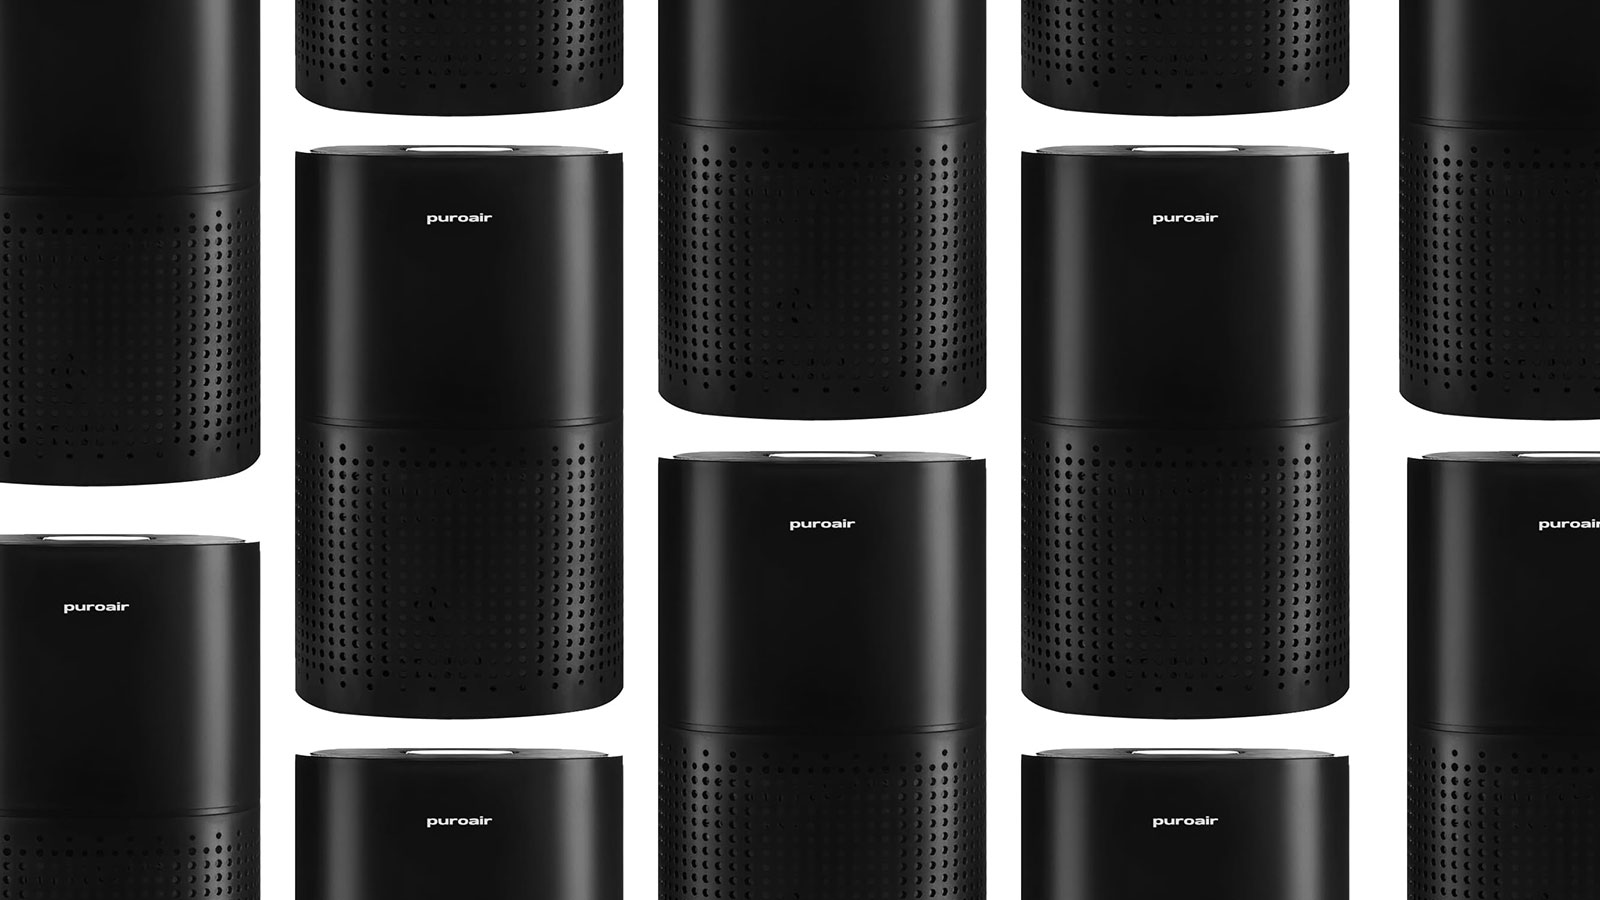 Save up to $70 on PuroAir HEPA Air Purifiers at Amazon now